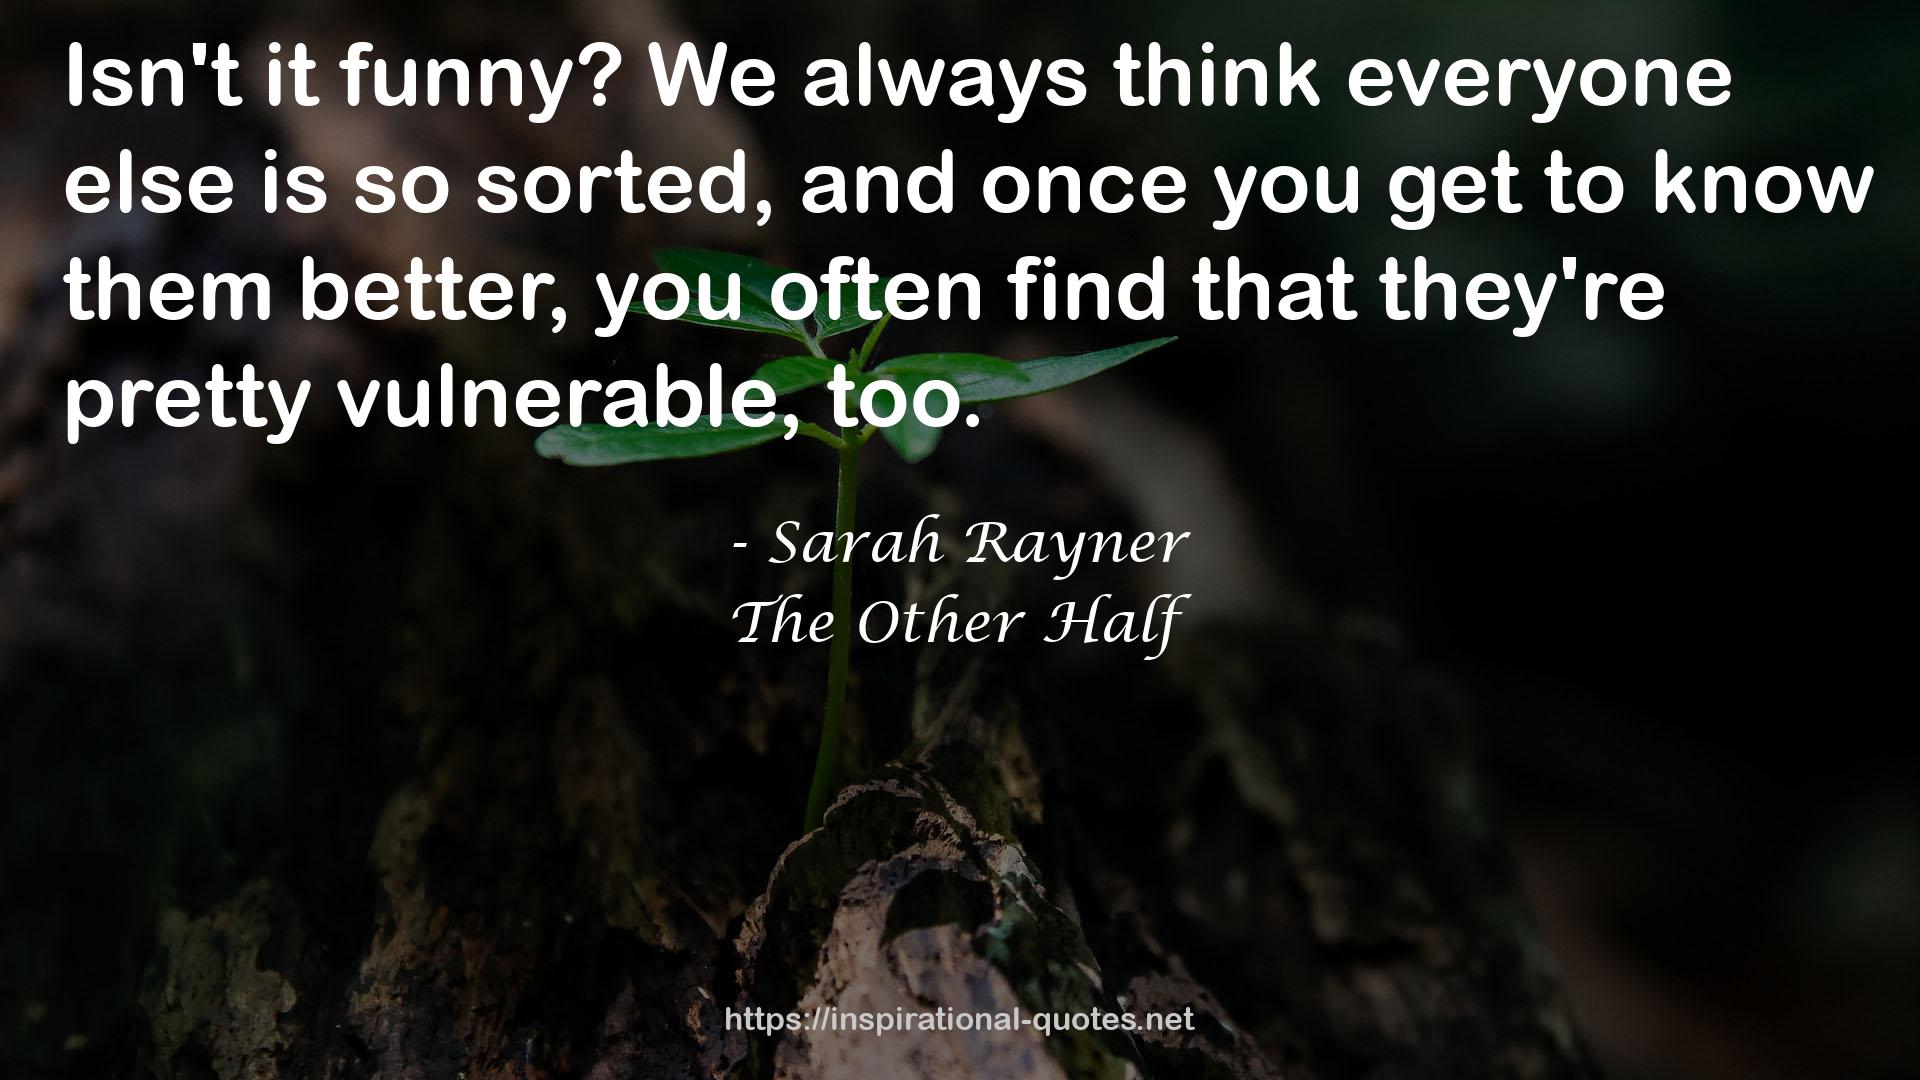 The Other Half QUOTES